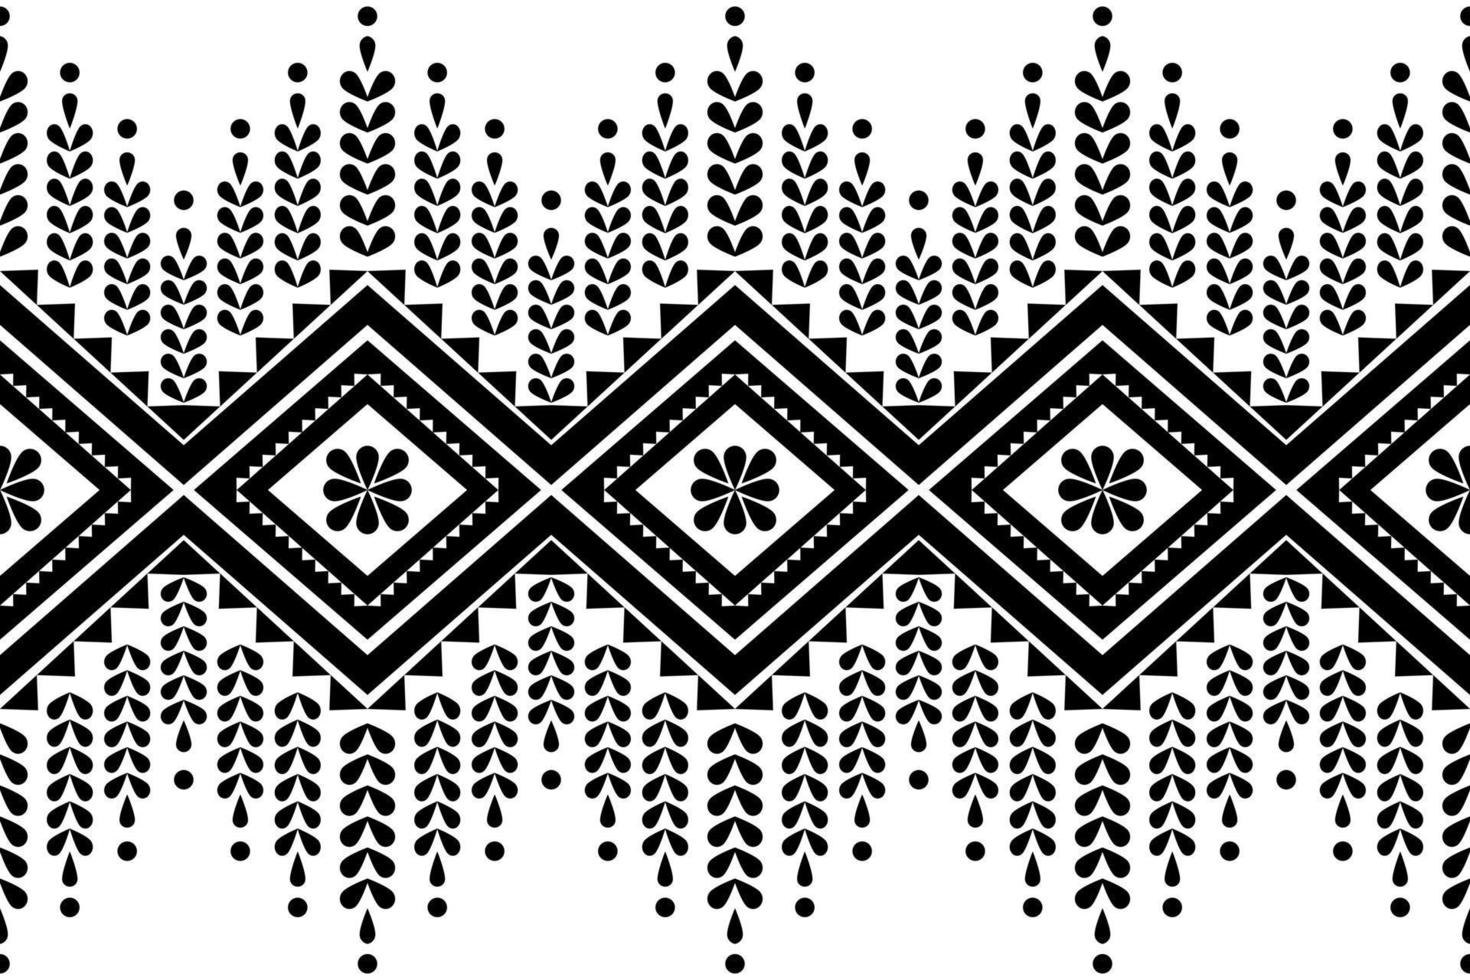 Vector abstract ethnic geometric pattern design for background or wallpaper.